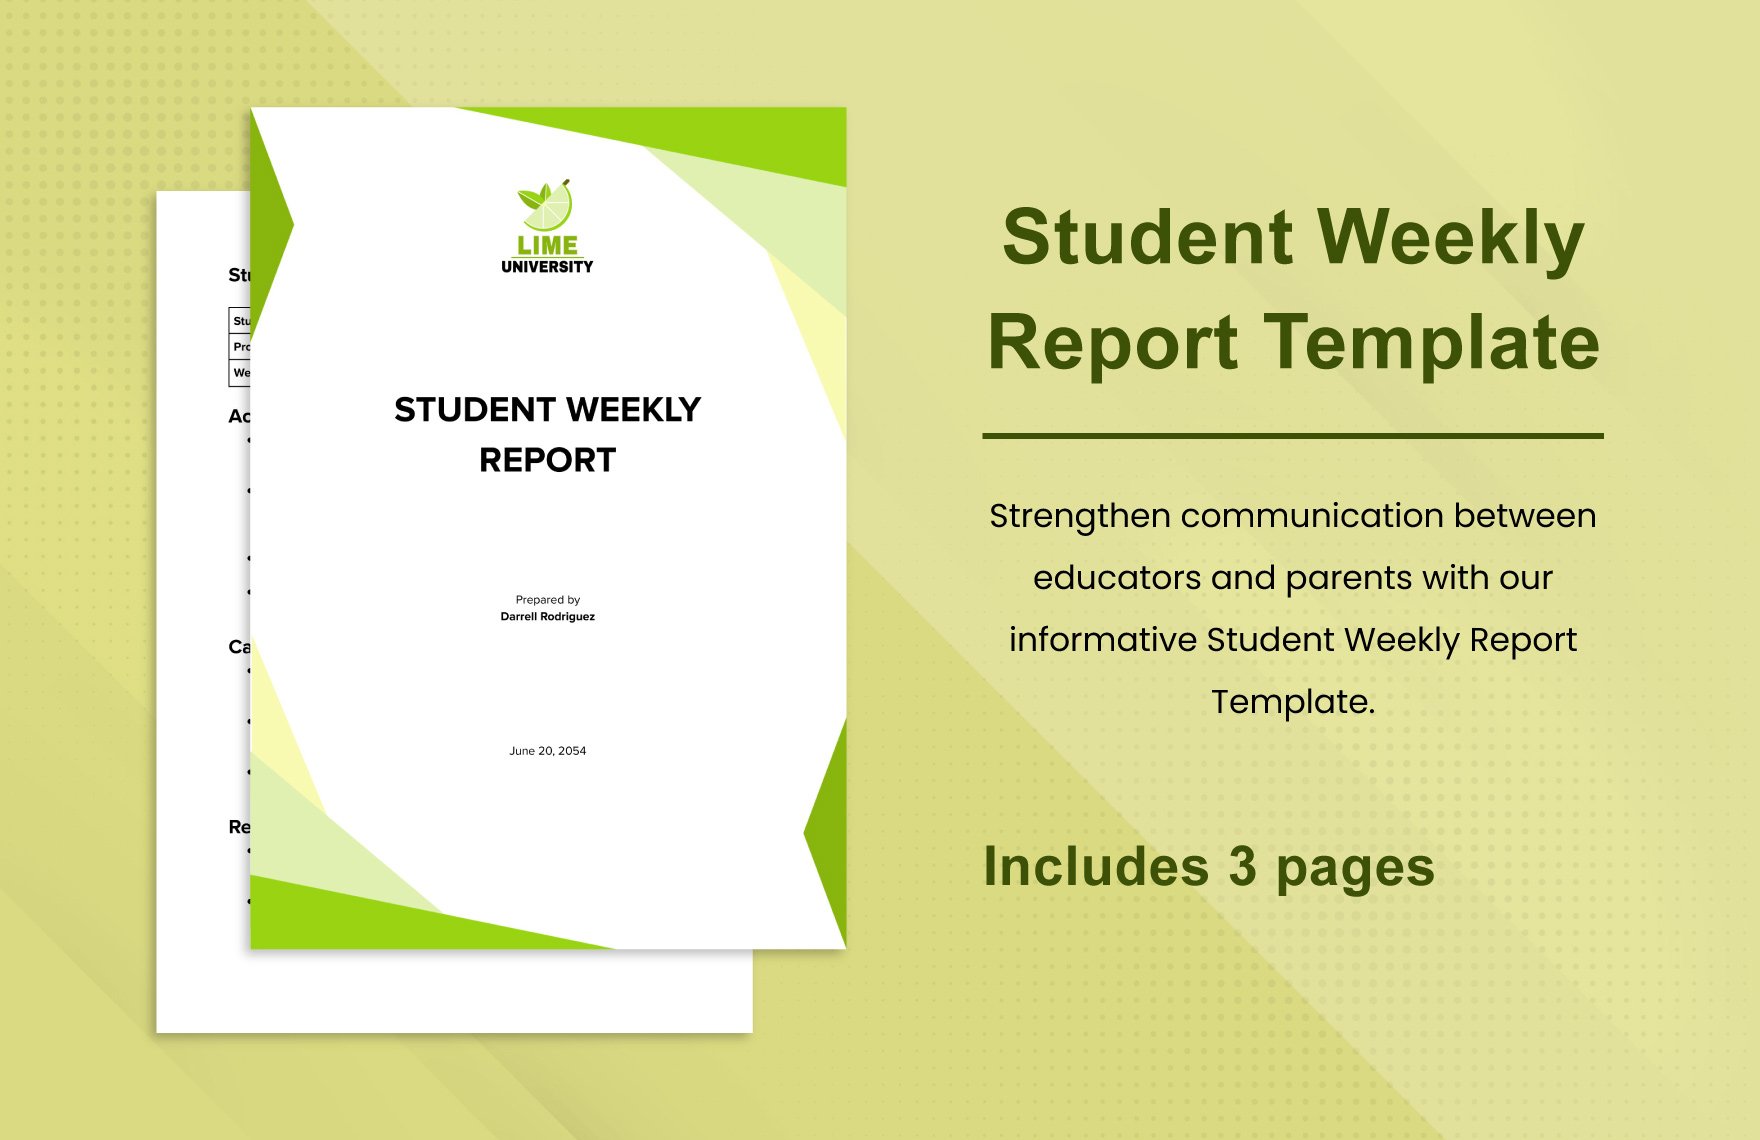 Student Weekly Report Template